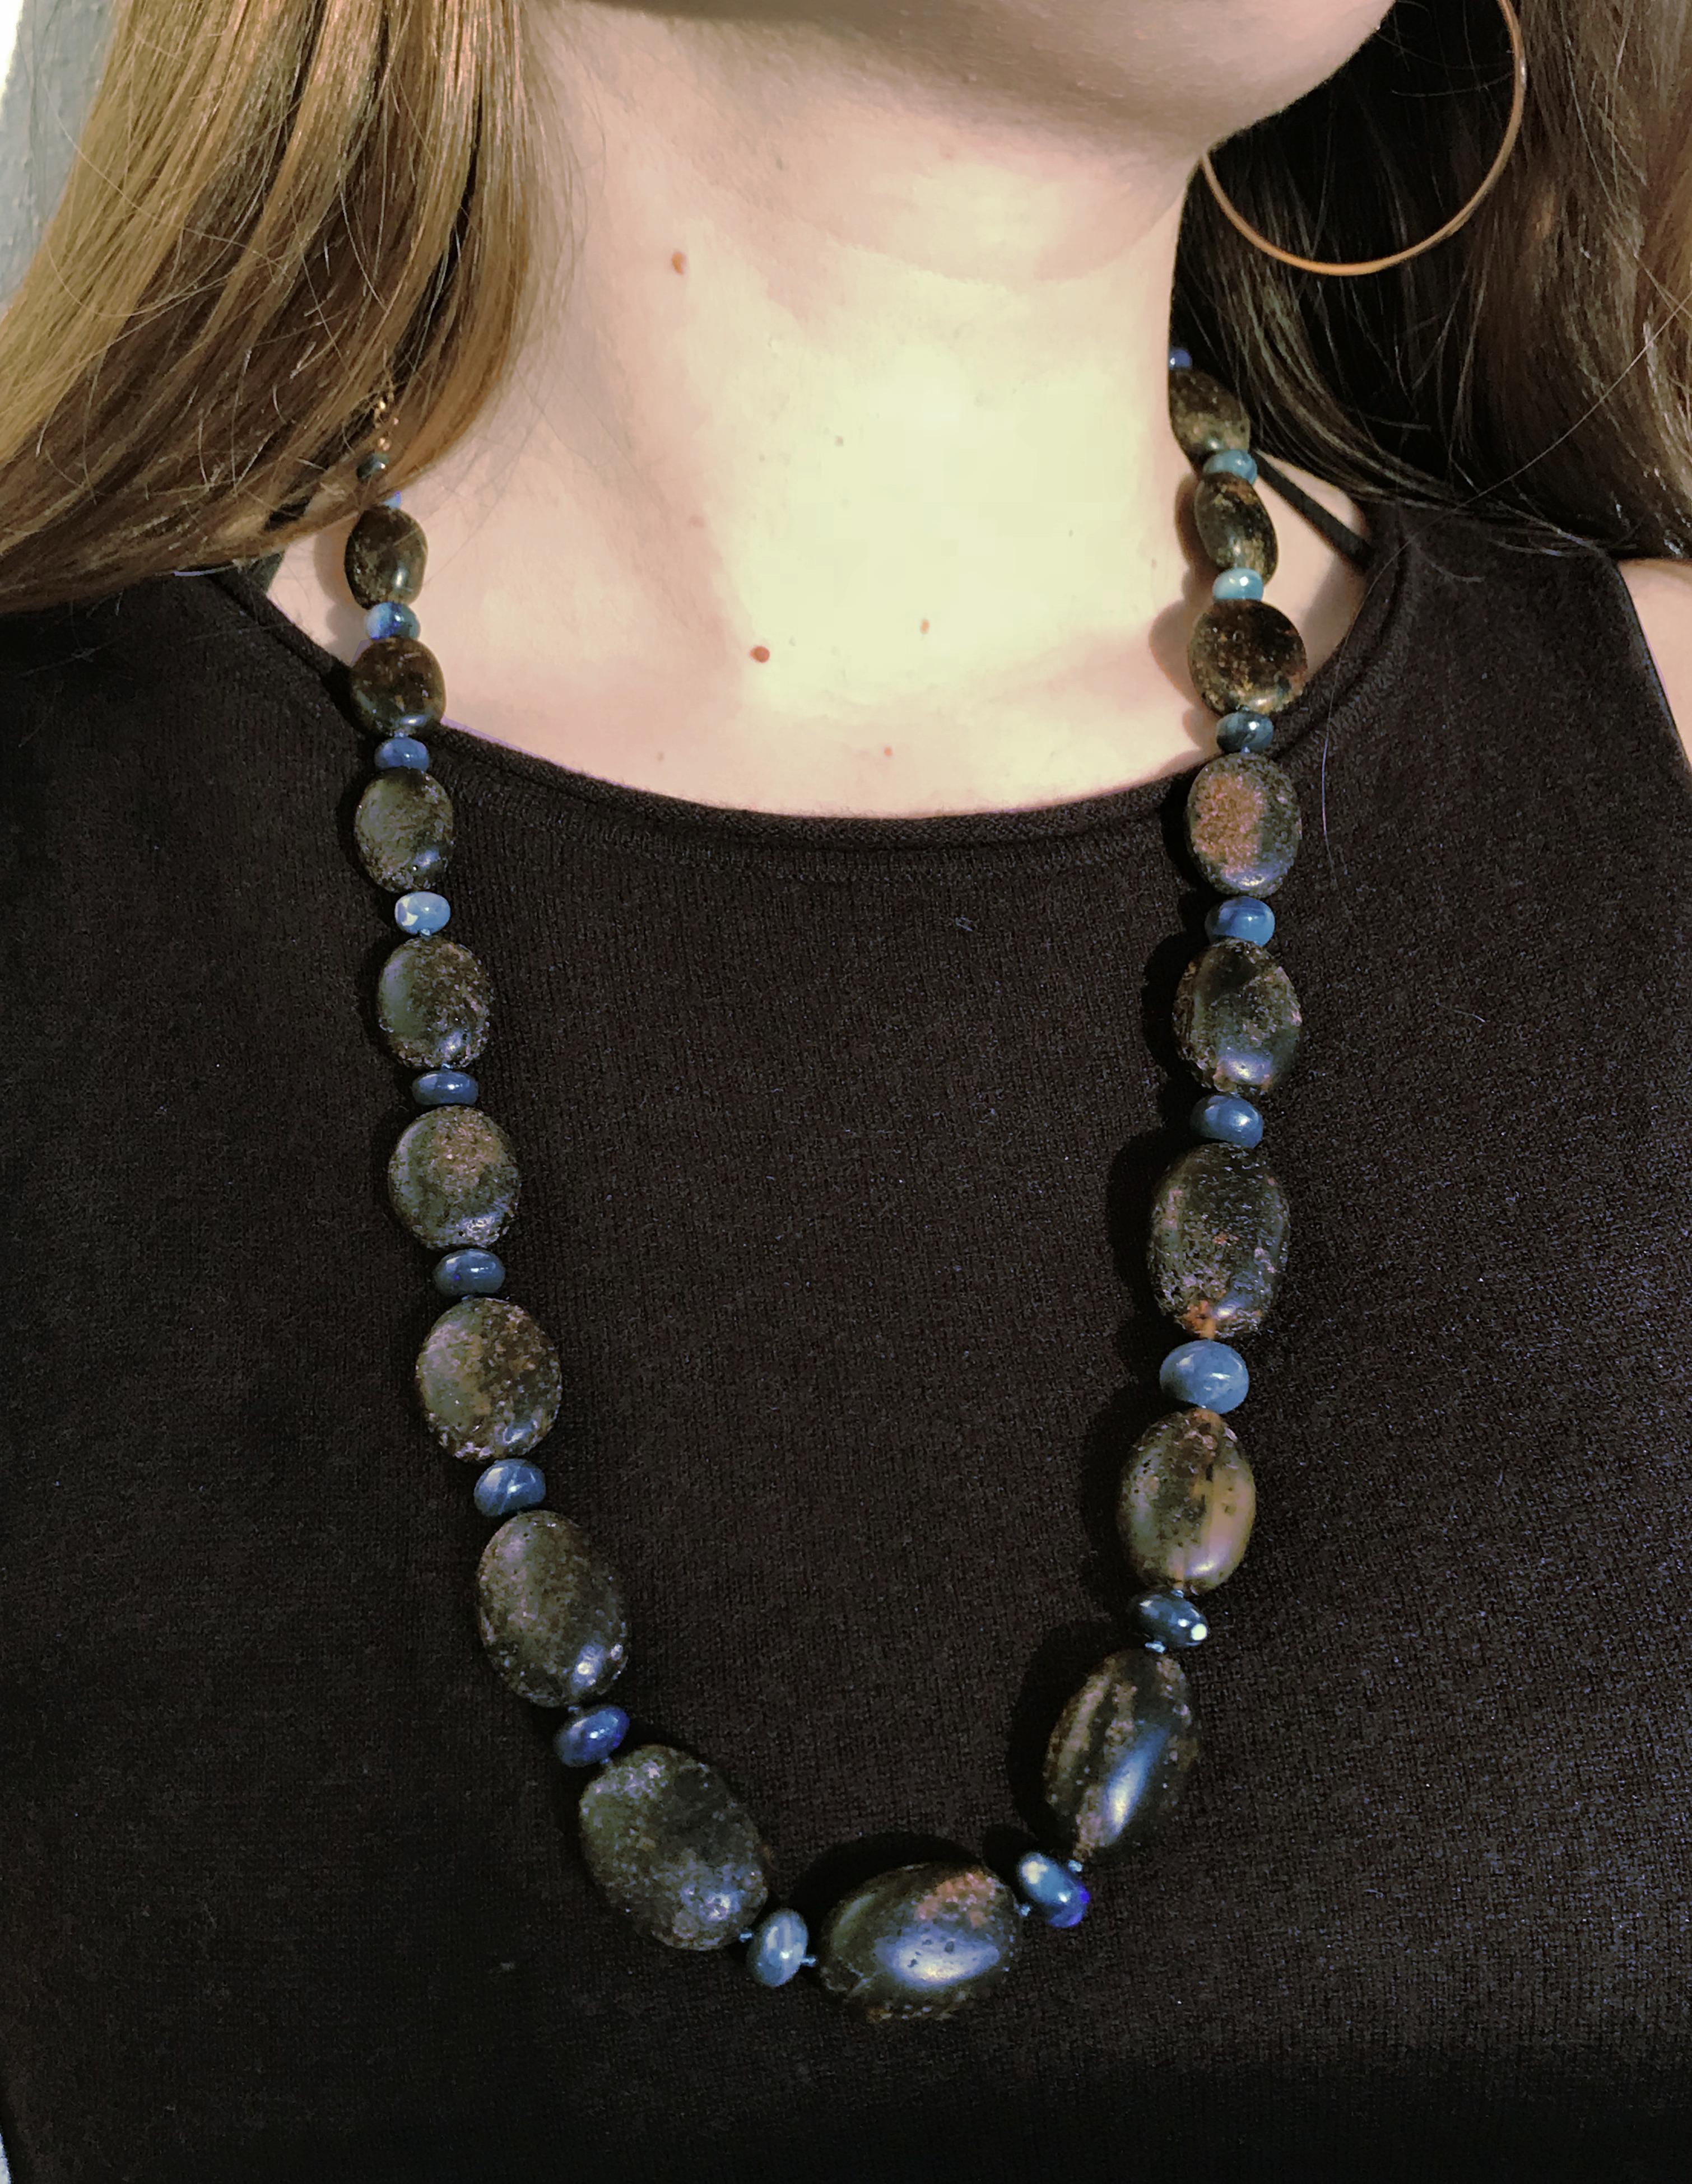 Dalben design necklace composed of rough baltic amber big bead , blue-grey Australian opals bead , and a 18 k rose gold  clasp. 
The necklace length is 28 inch ( 71 cm ).
Beads dimension : amber 17-12 mm , opals 11-7 mm . 